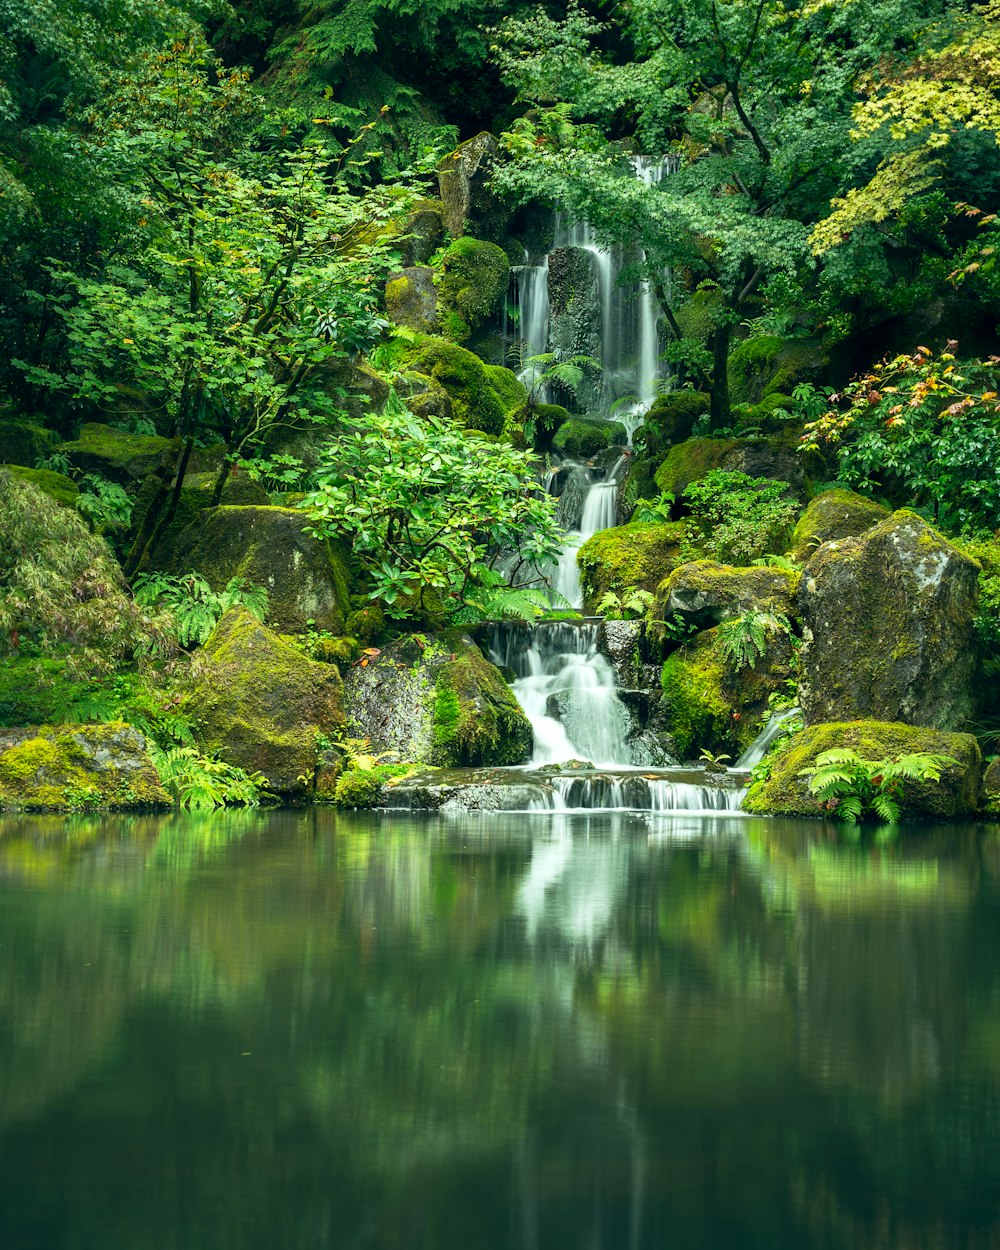 waterfalls surrounded by green-leafed trees during daytime